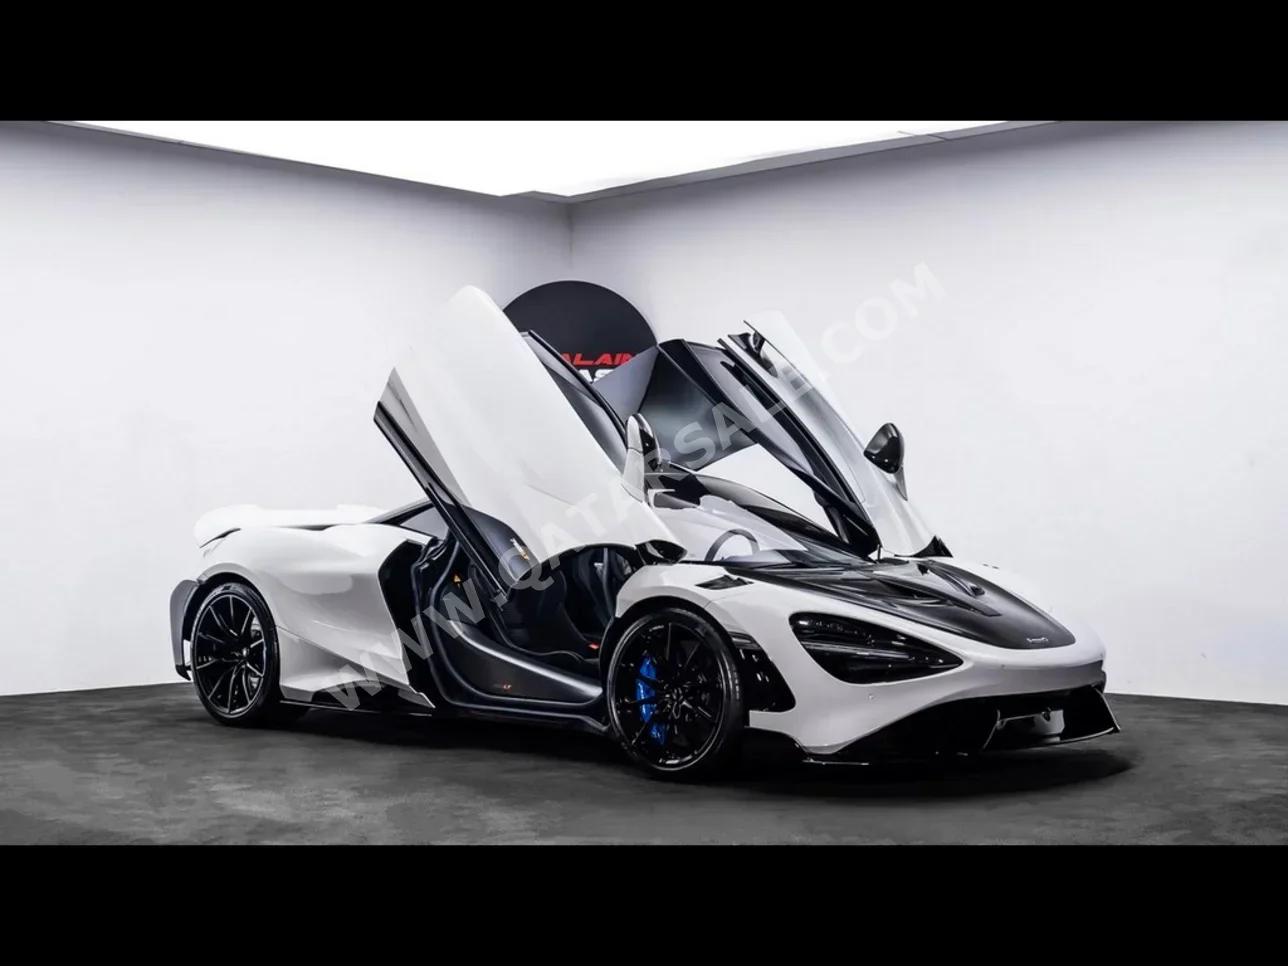 Mclaren  765 LT  2021  Automatic  2,520 Km  8 Cylinder  All Wheel Drive (AWD)  Coupe / Sport  White